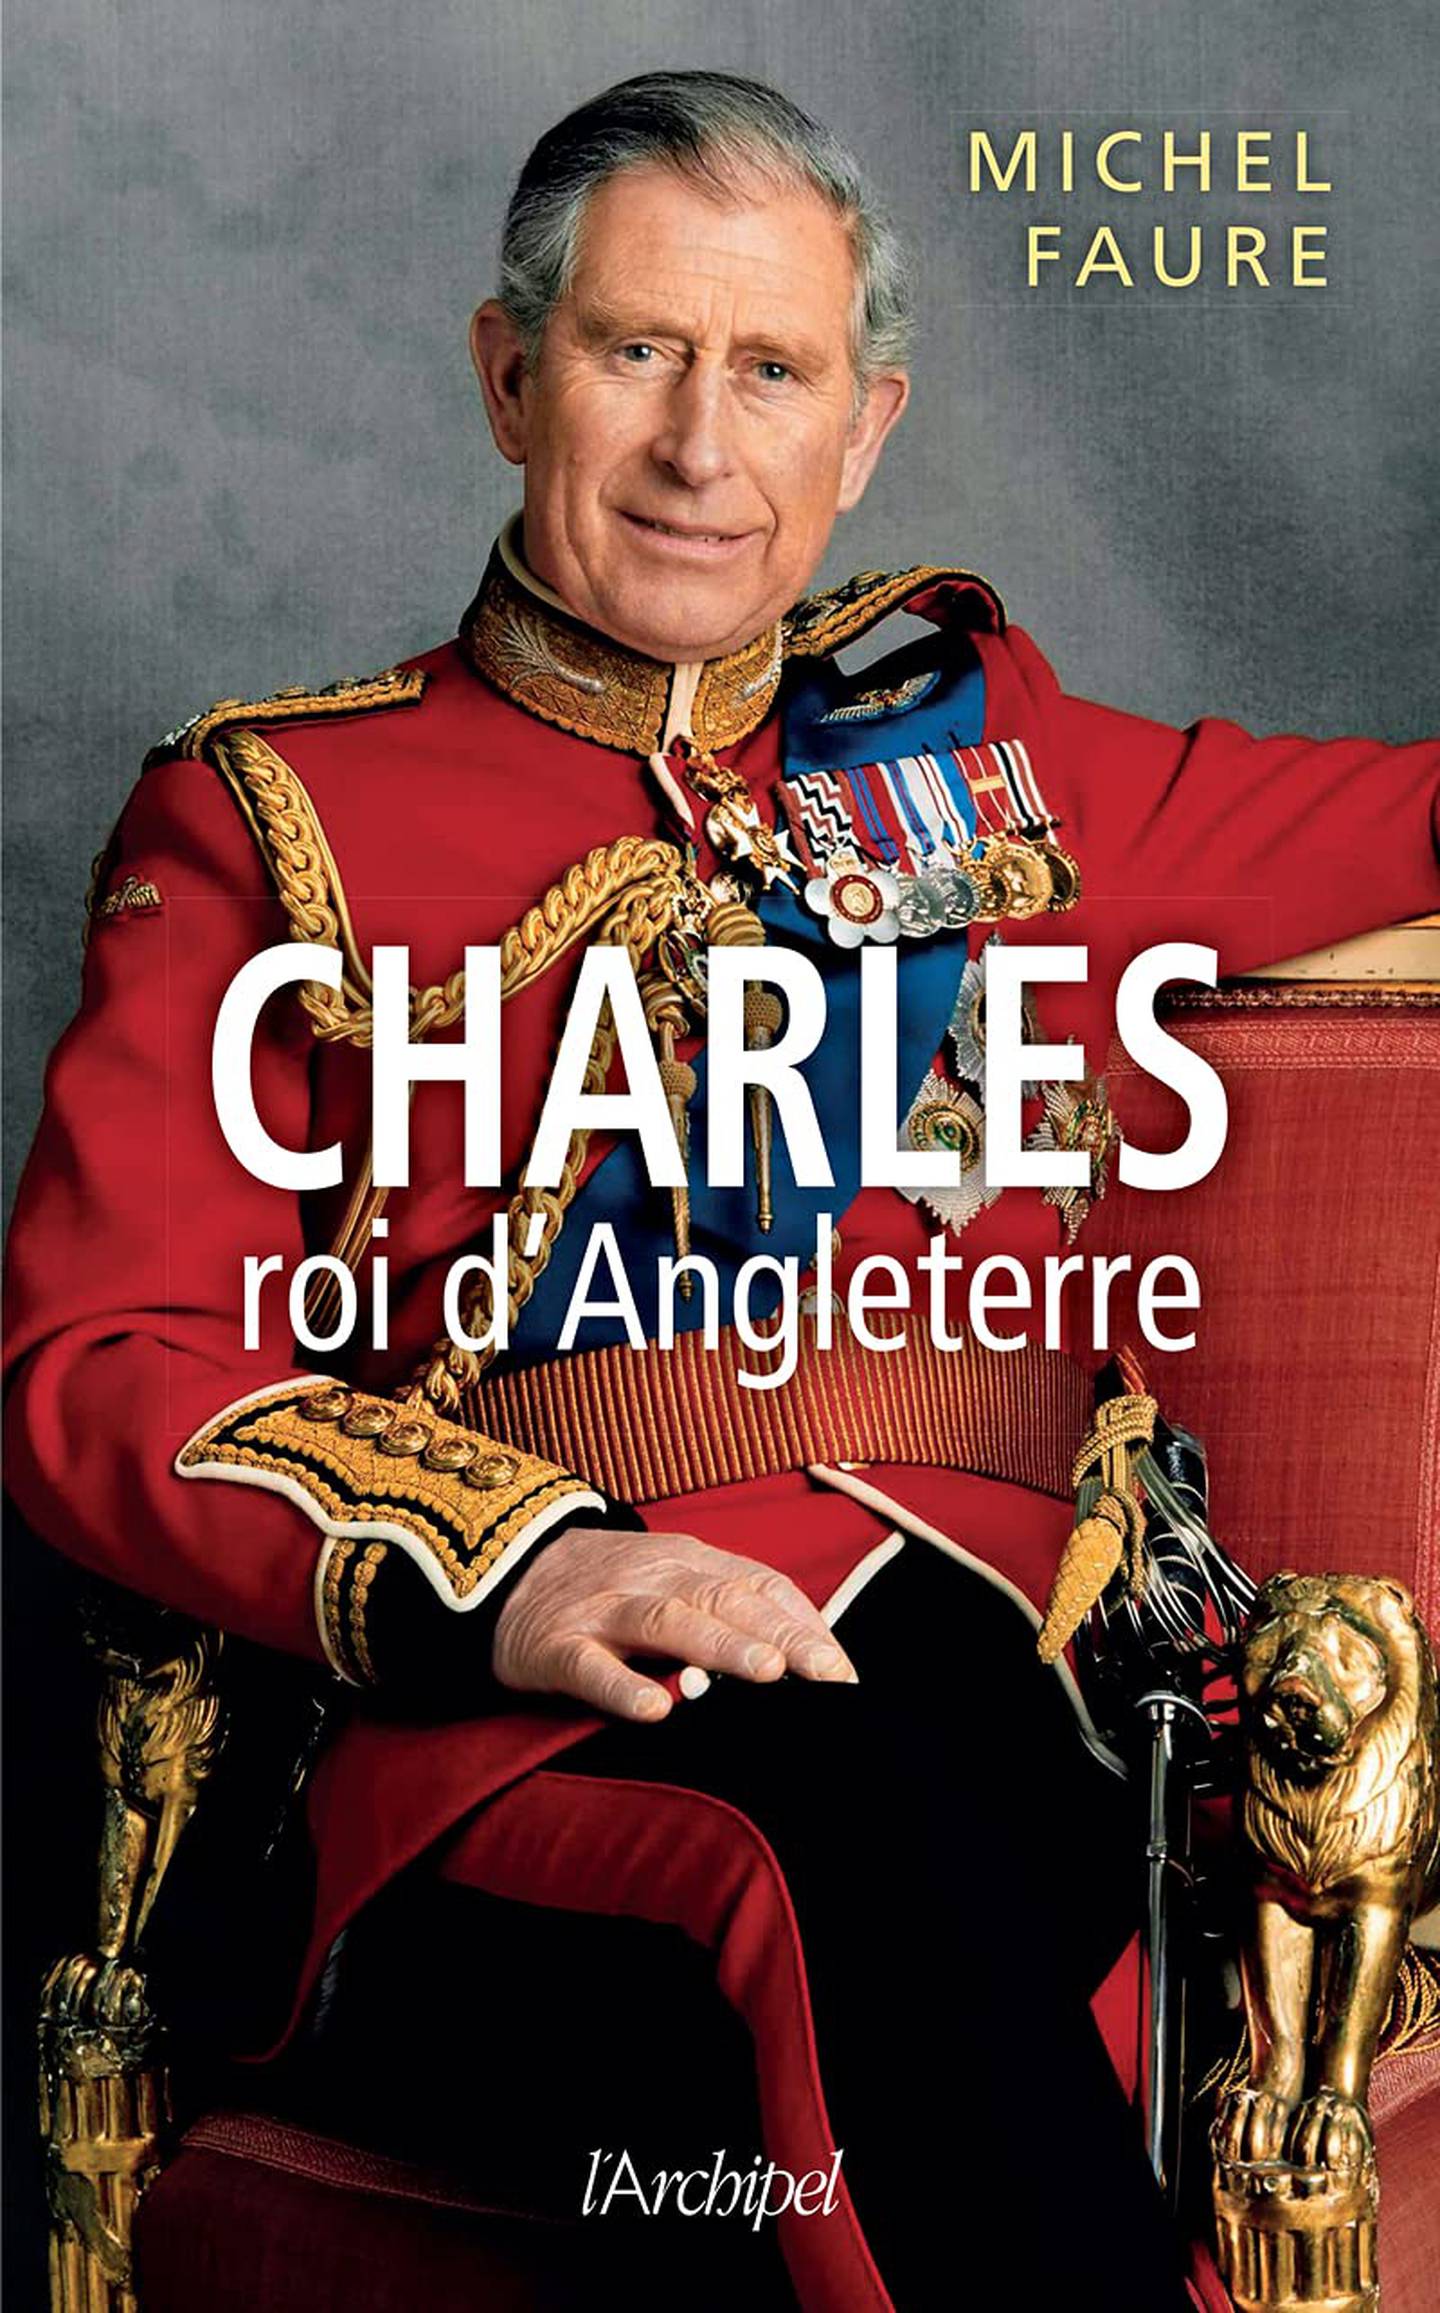 Michel Faure's book Charles, roi d'Angleterre.